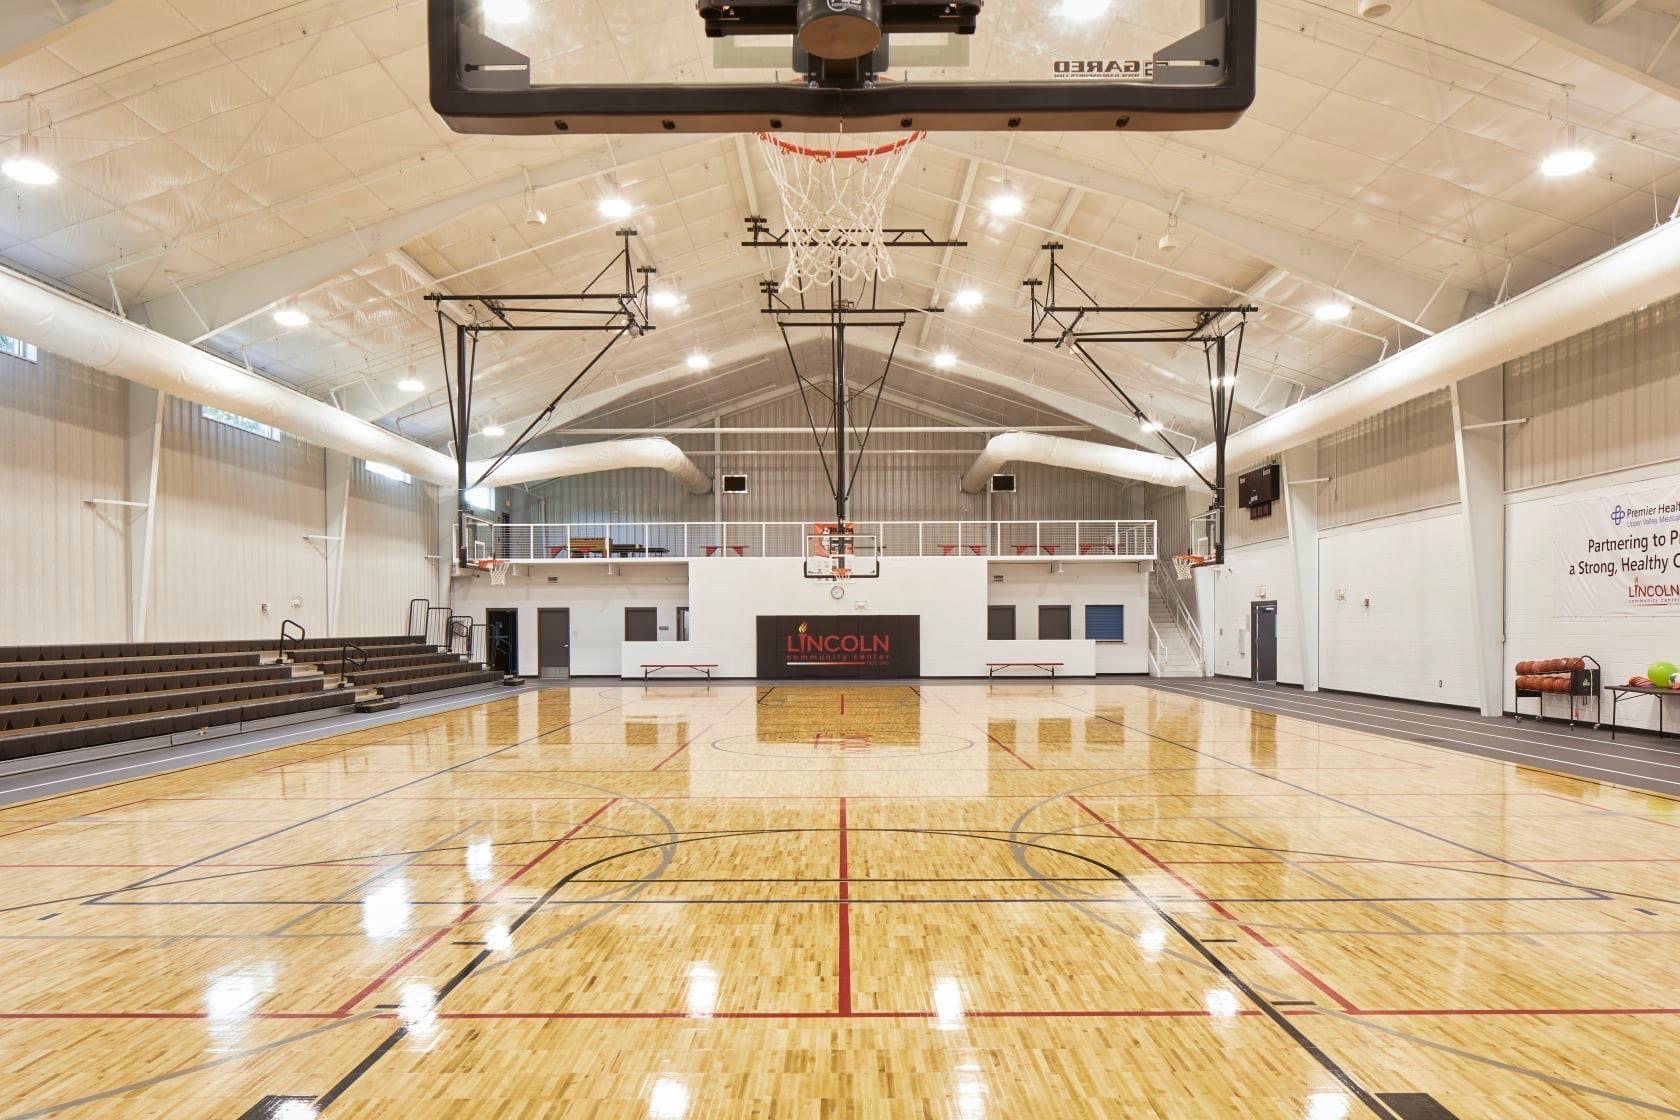 Lincoln Community Center Gym in Troy, Ohio